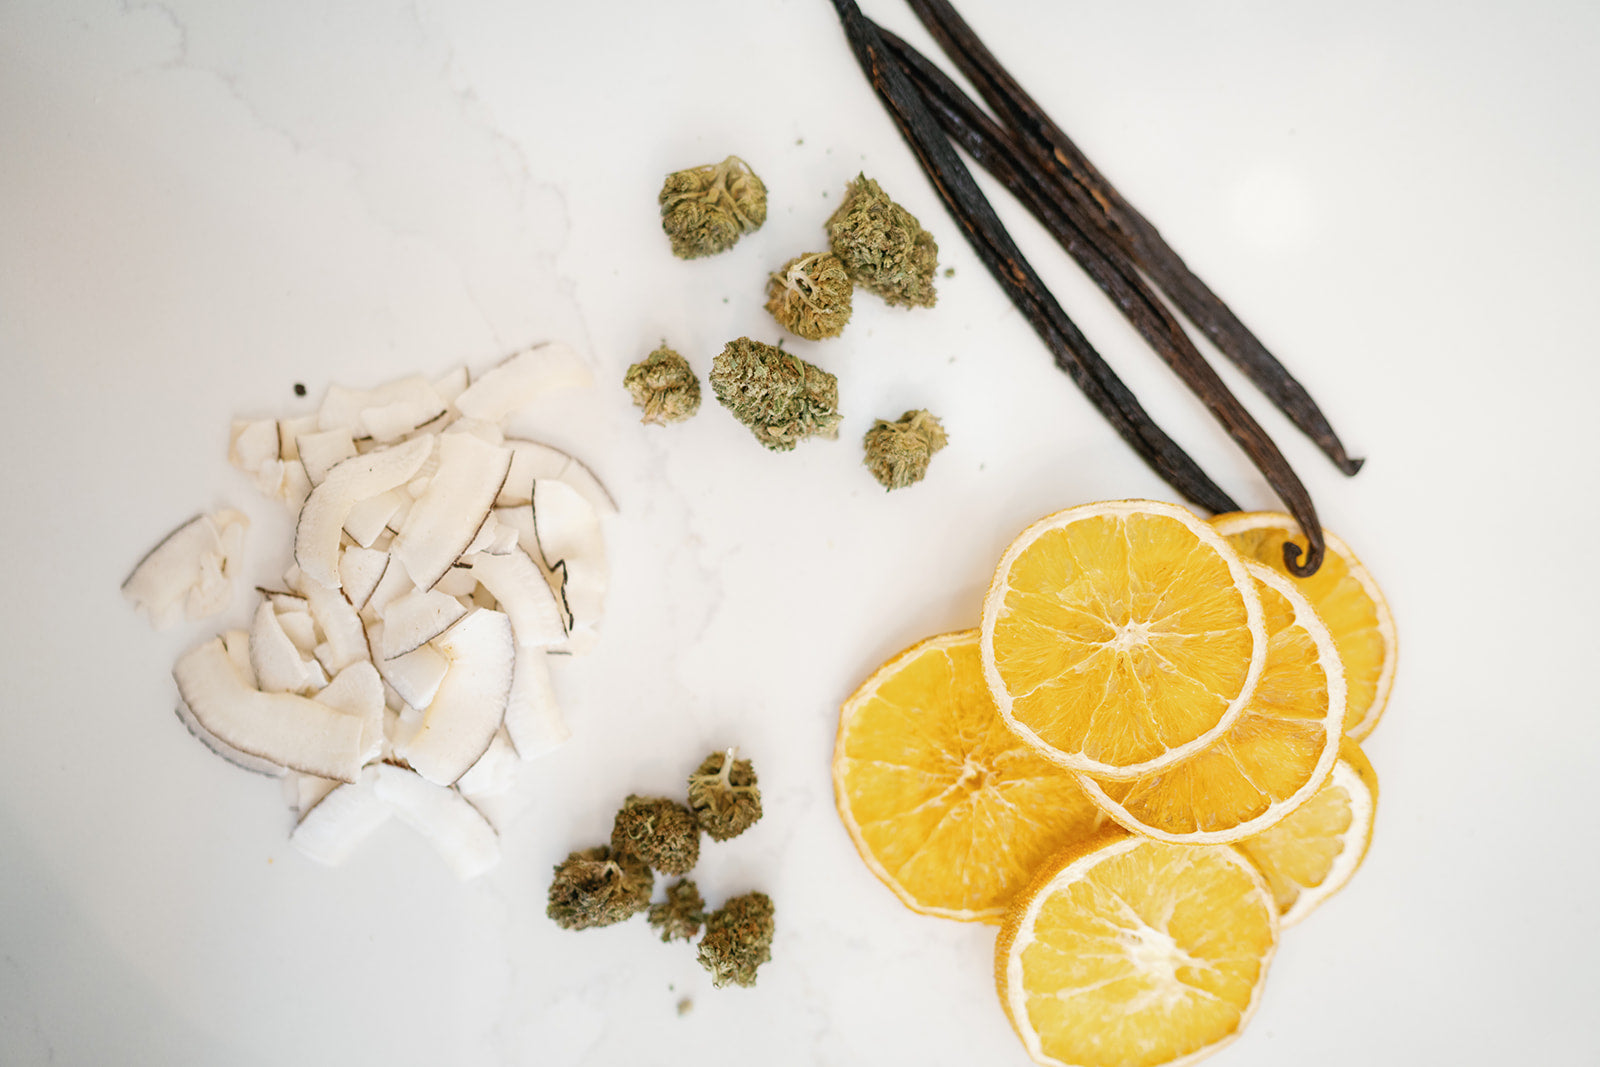 Coconut chips, dried orange slices, vanilla bean pods and hemp flower laid out in a circle to show ingredients for a product